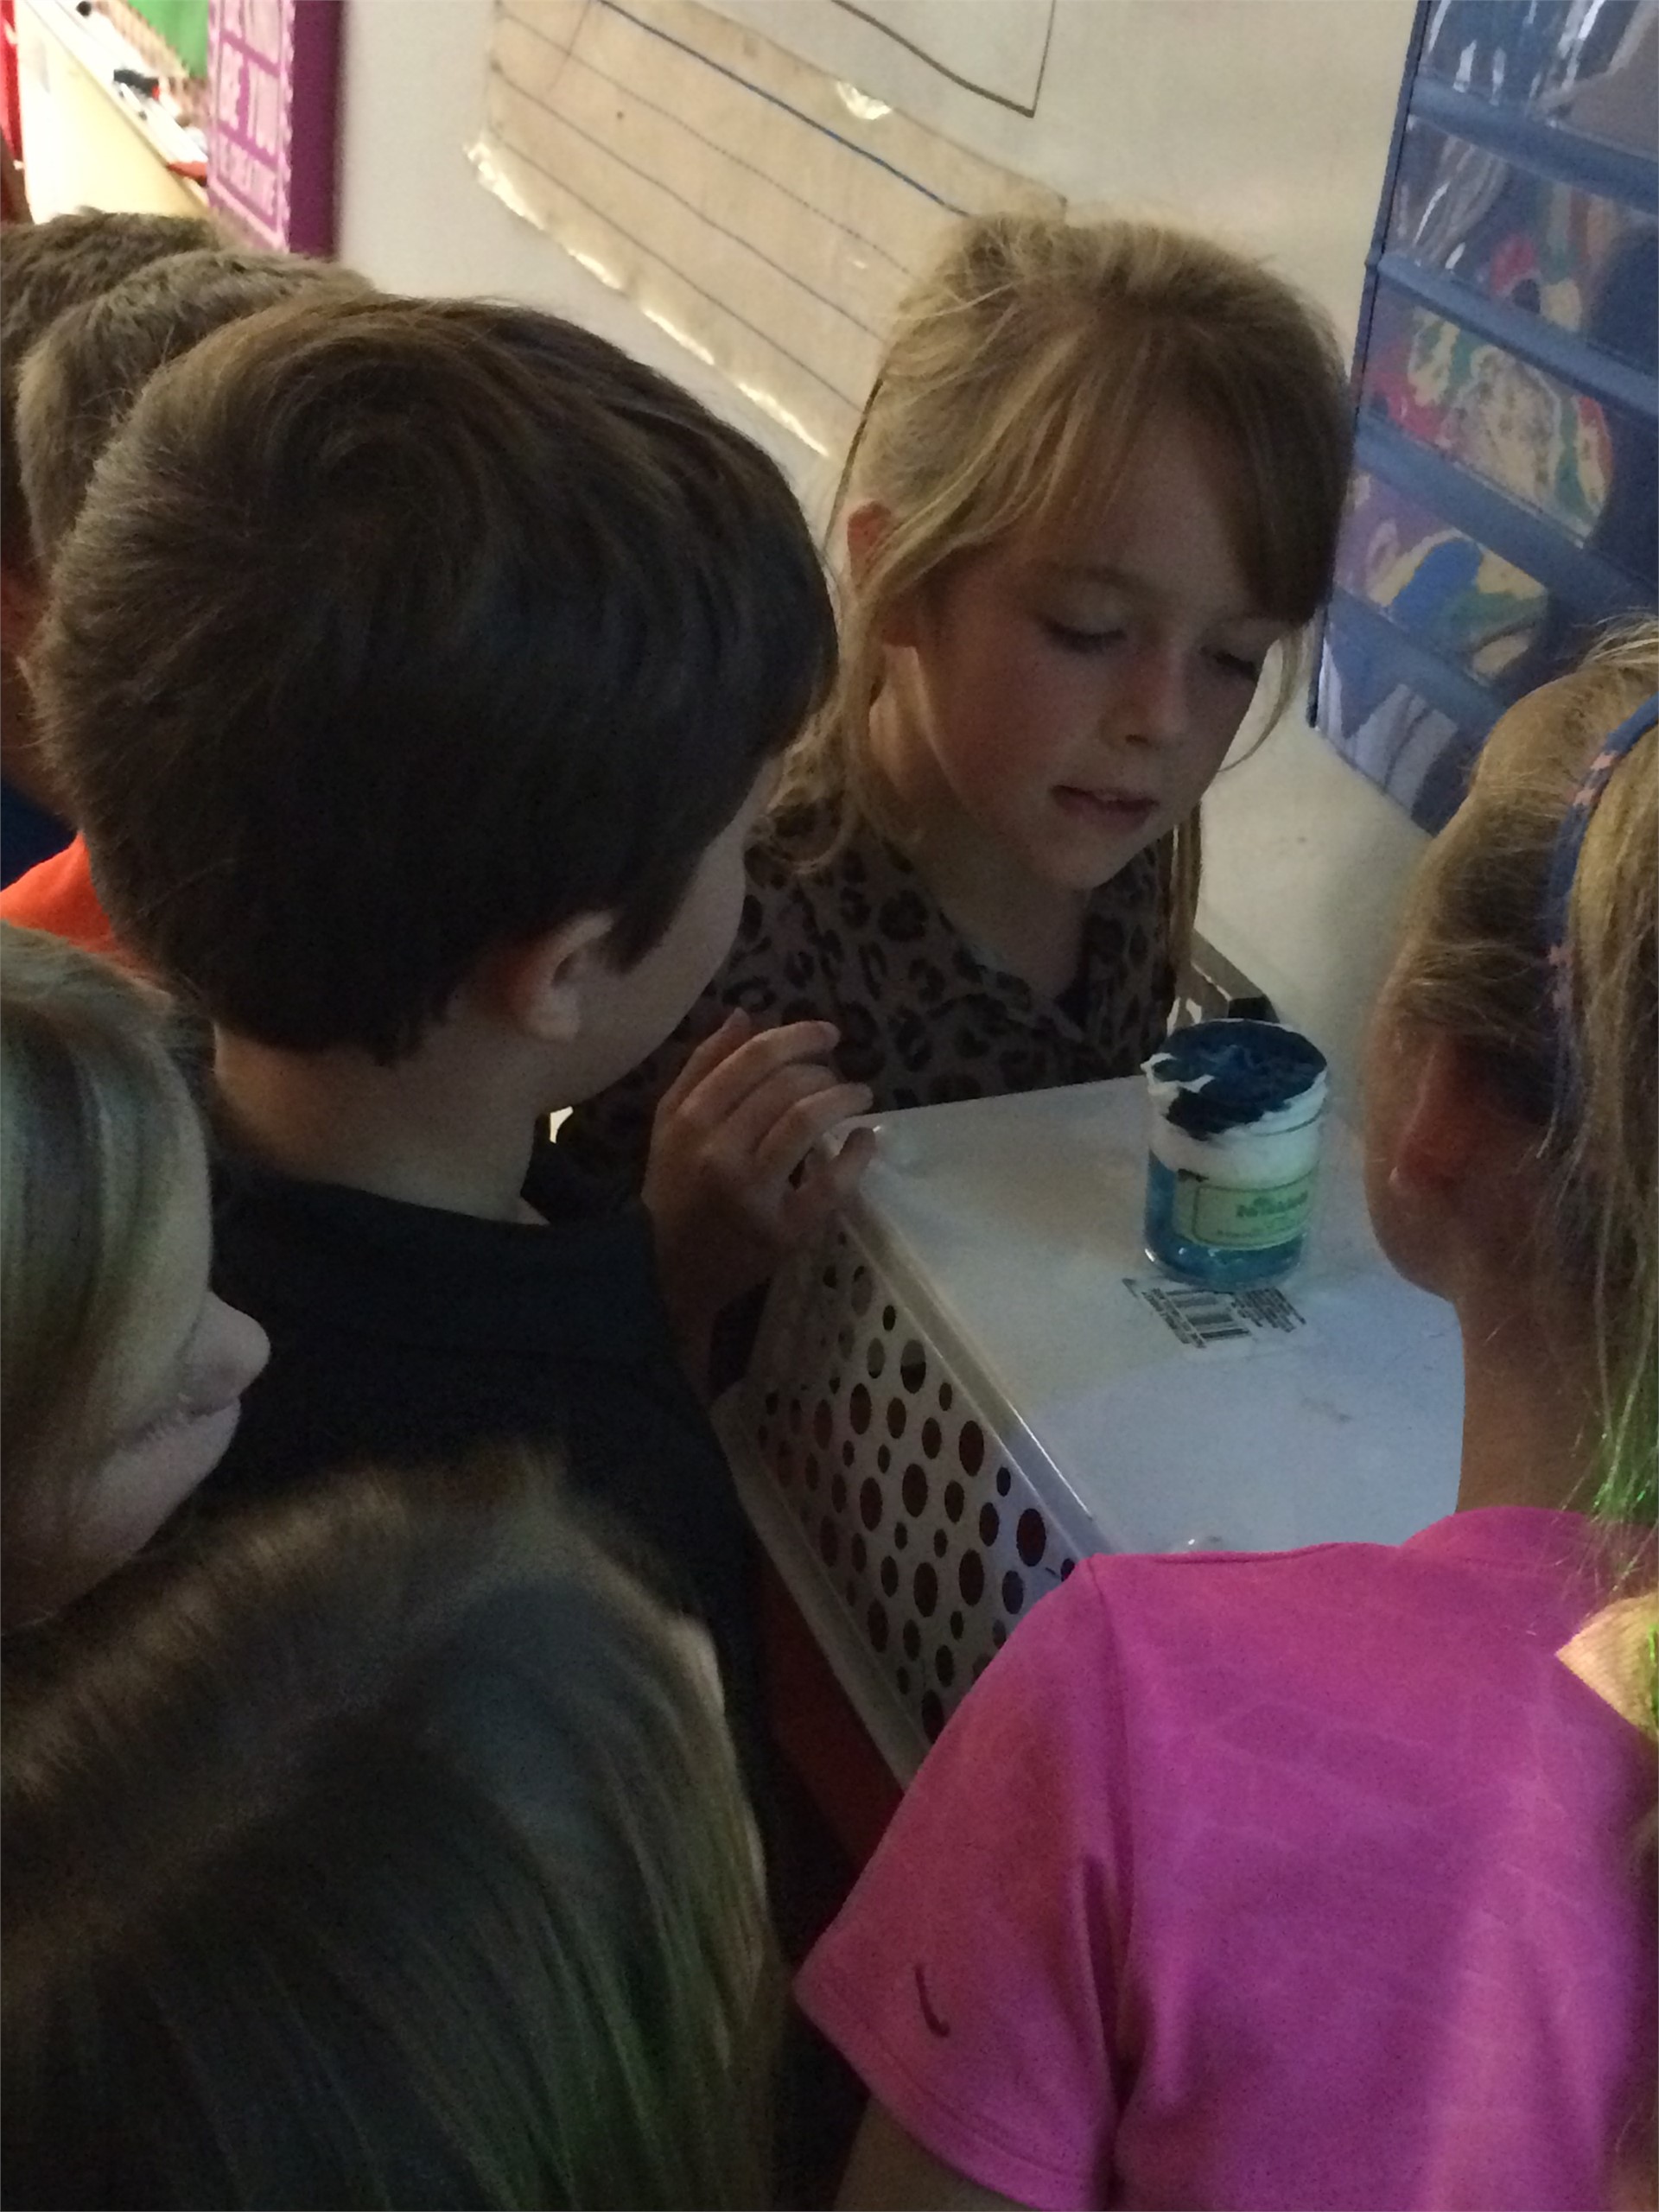 Exploring science through the physical properties of water!